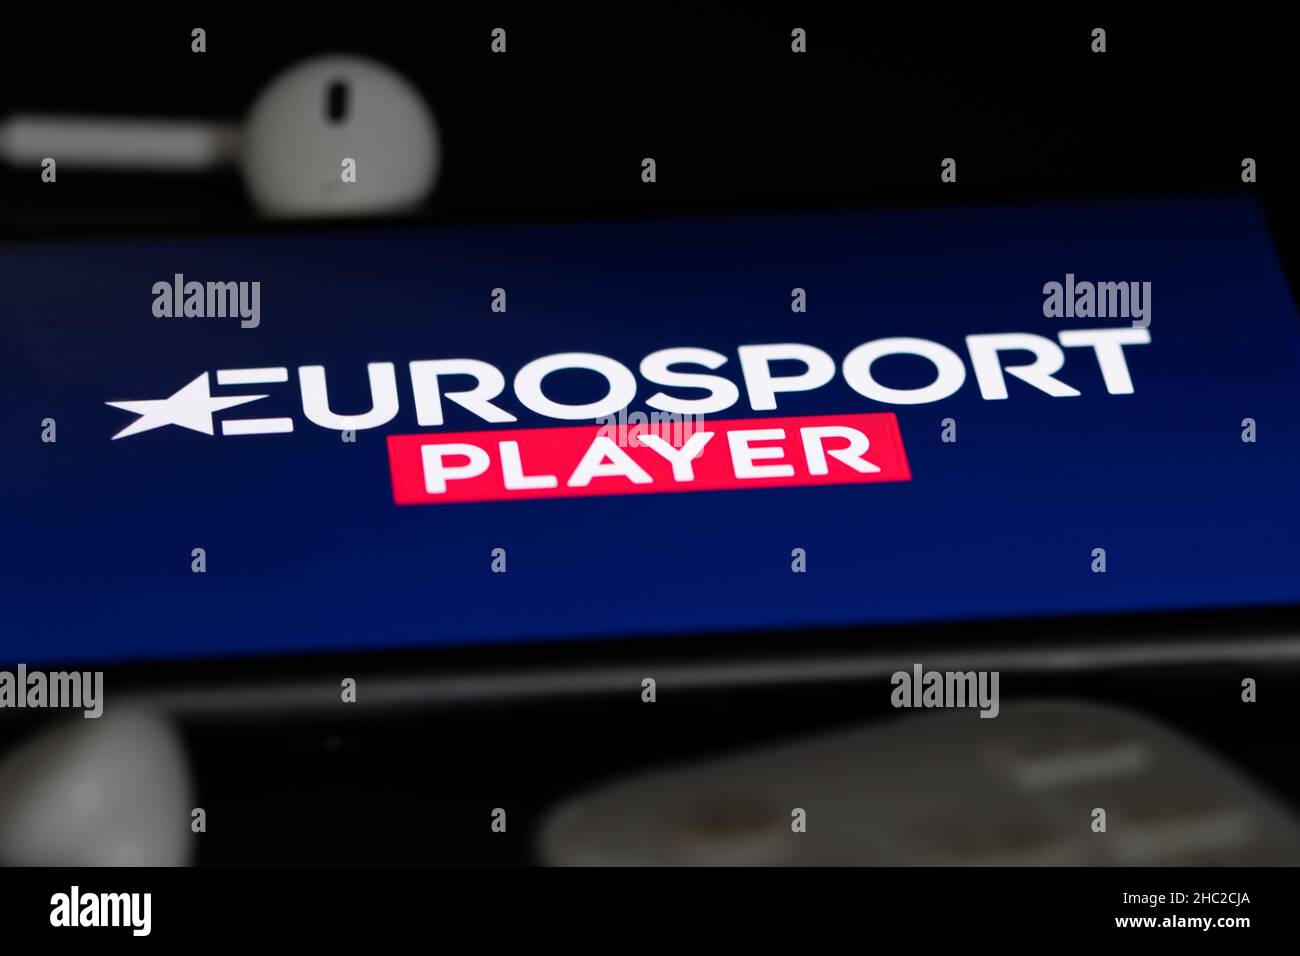 Eurosport Player High Resolution Stock Photography and Images - Alamy